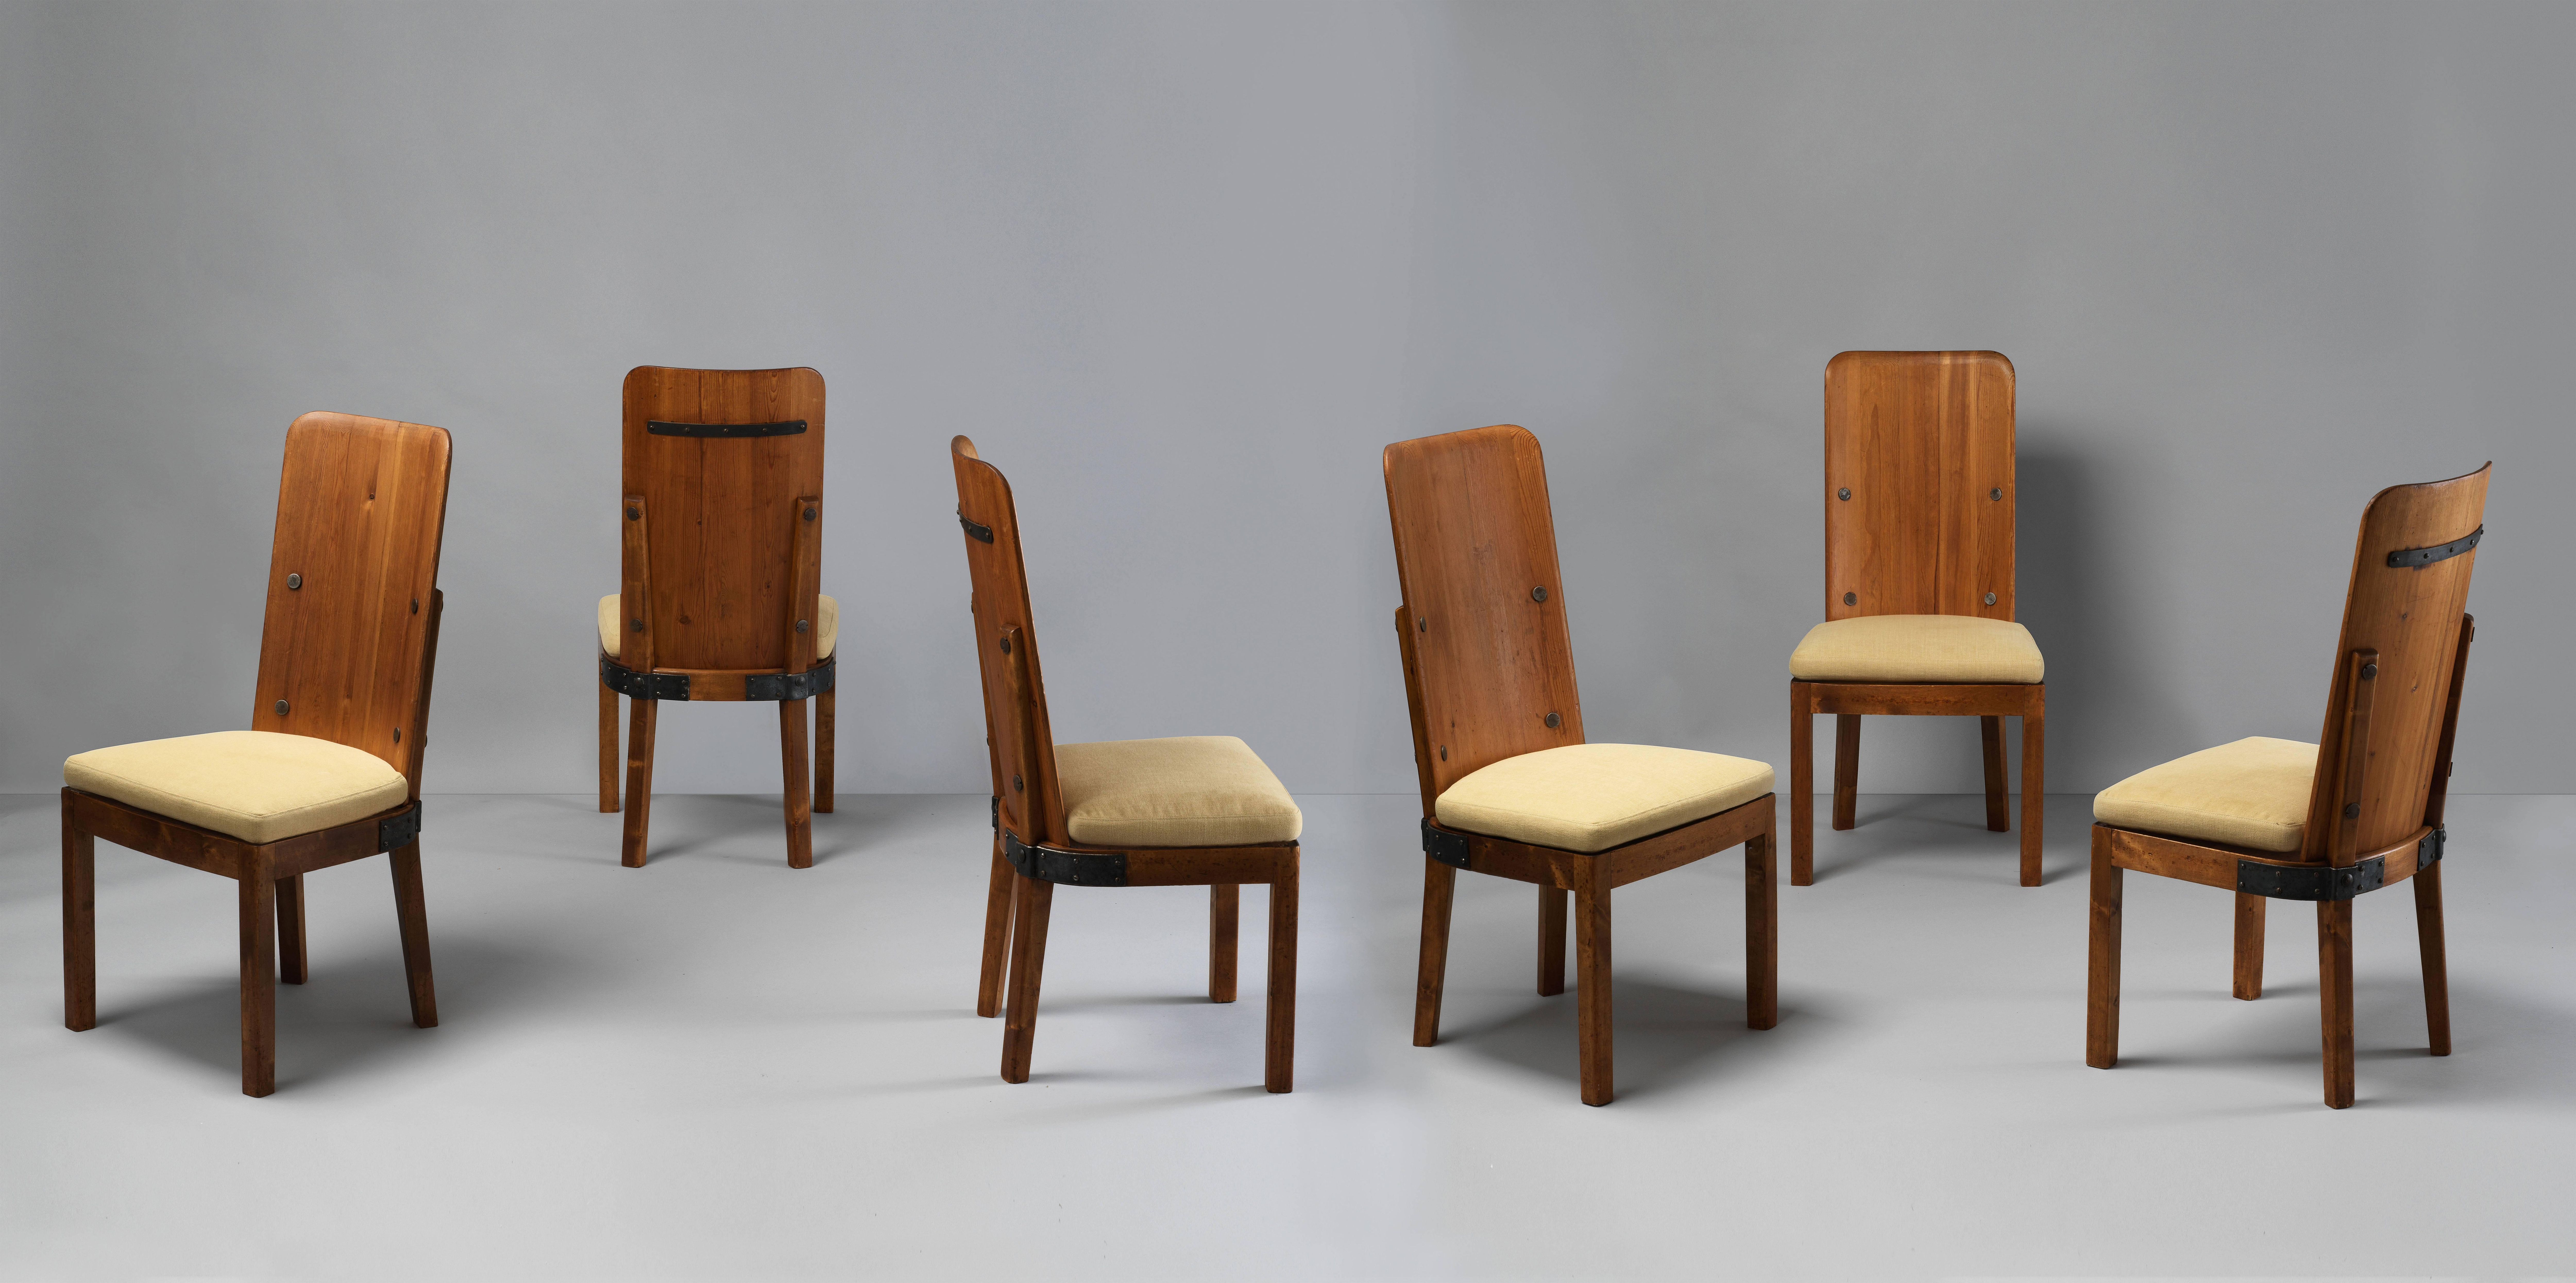 A set of six Lovö dining chairs by Axel Einar Hjorth, produced by Nordiska Kompaniet in the early 1930:s. Executed in pine and fortified by cast iron, giving the chairs a near Brutalist expression. Loose cushion seats in a brand new beige fabric.